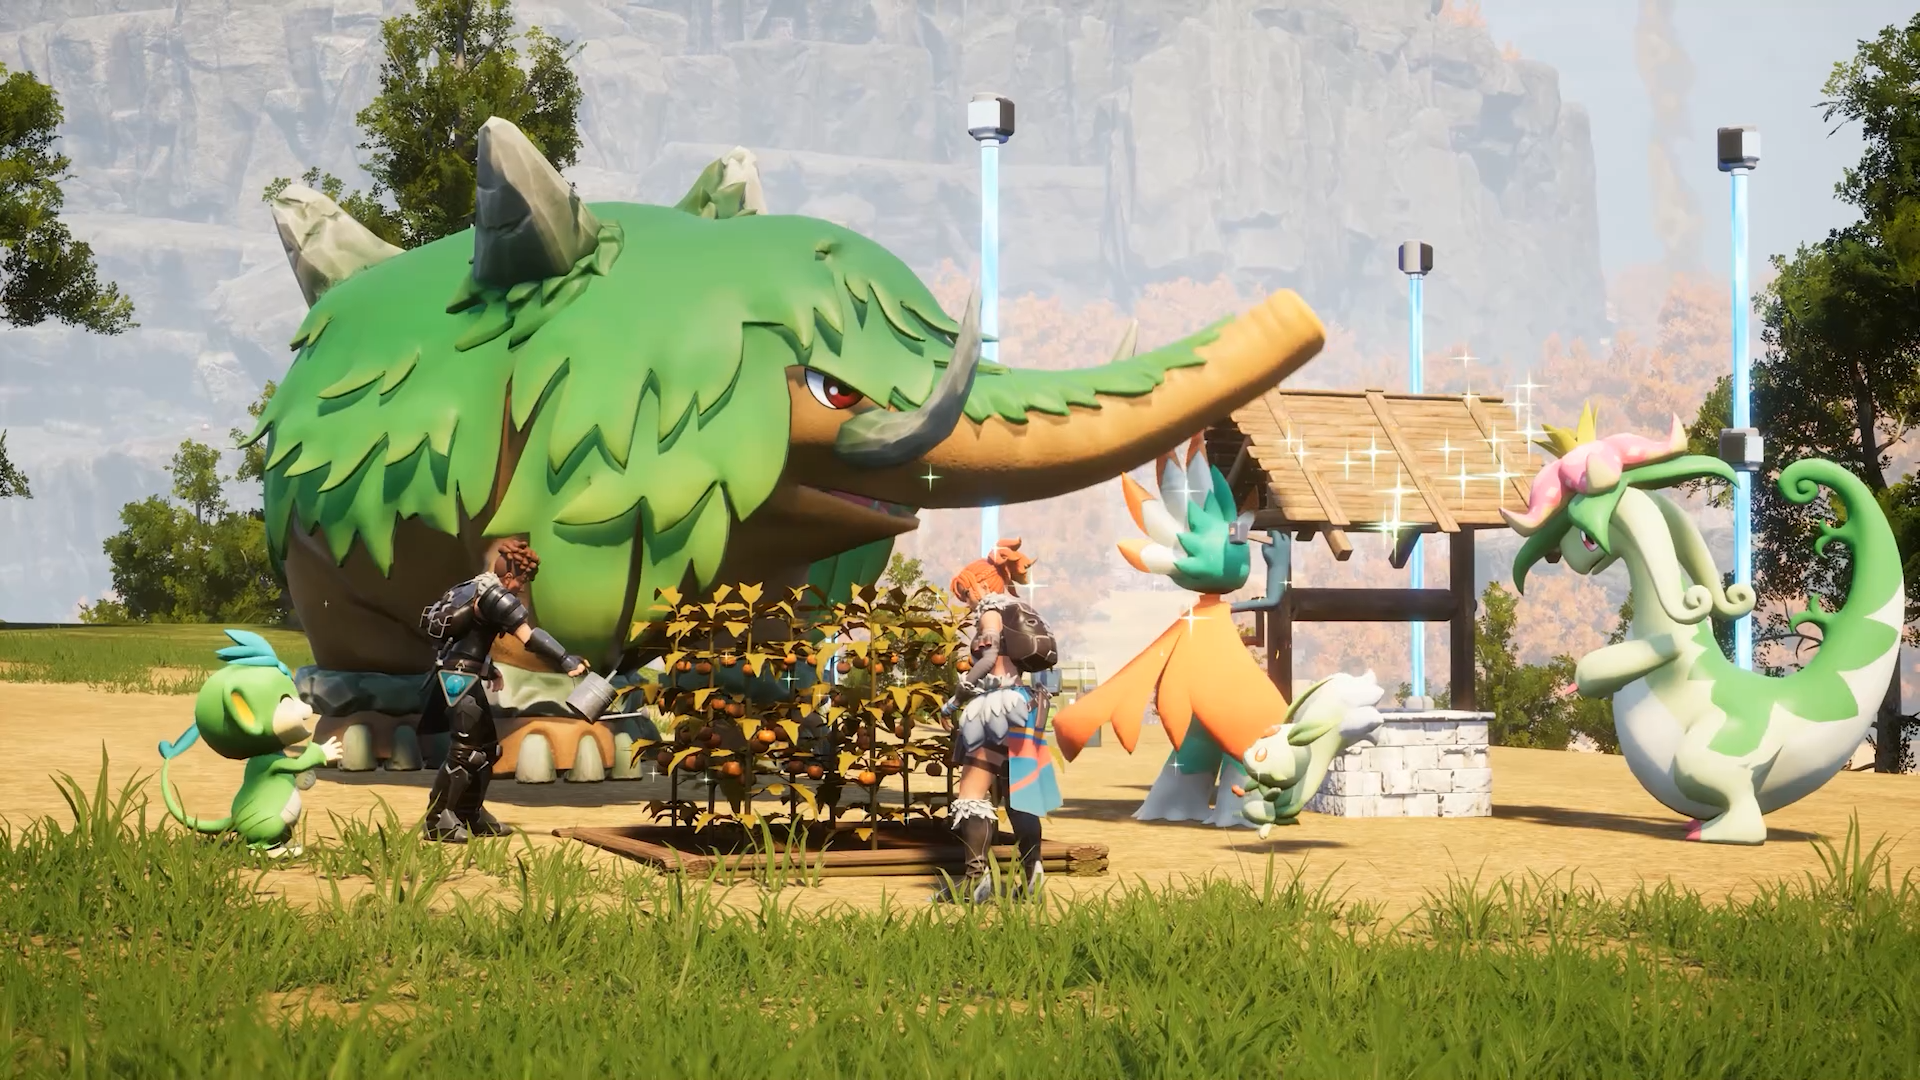 A giant green elephant stands near a well in key art for Palworld which has Palworld mods.